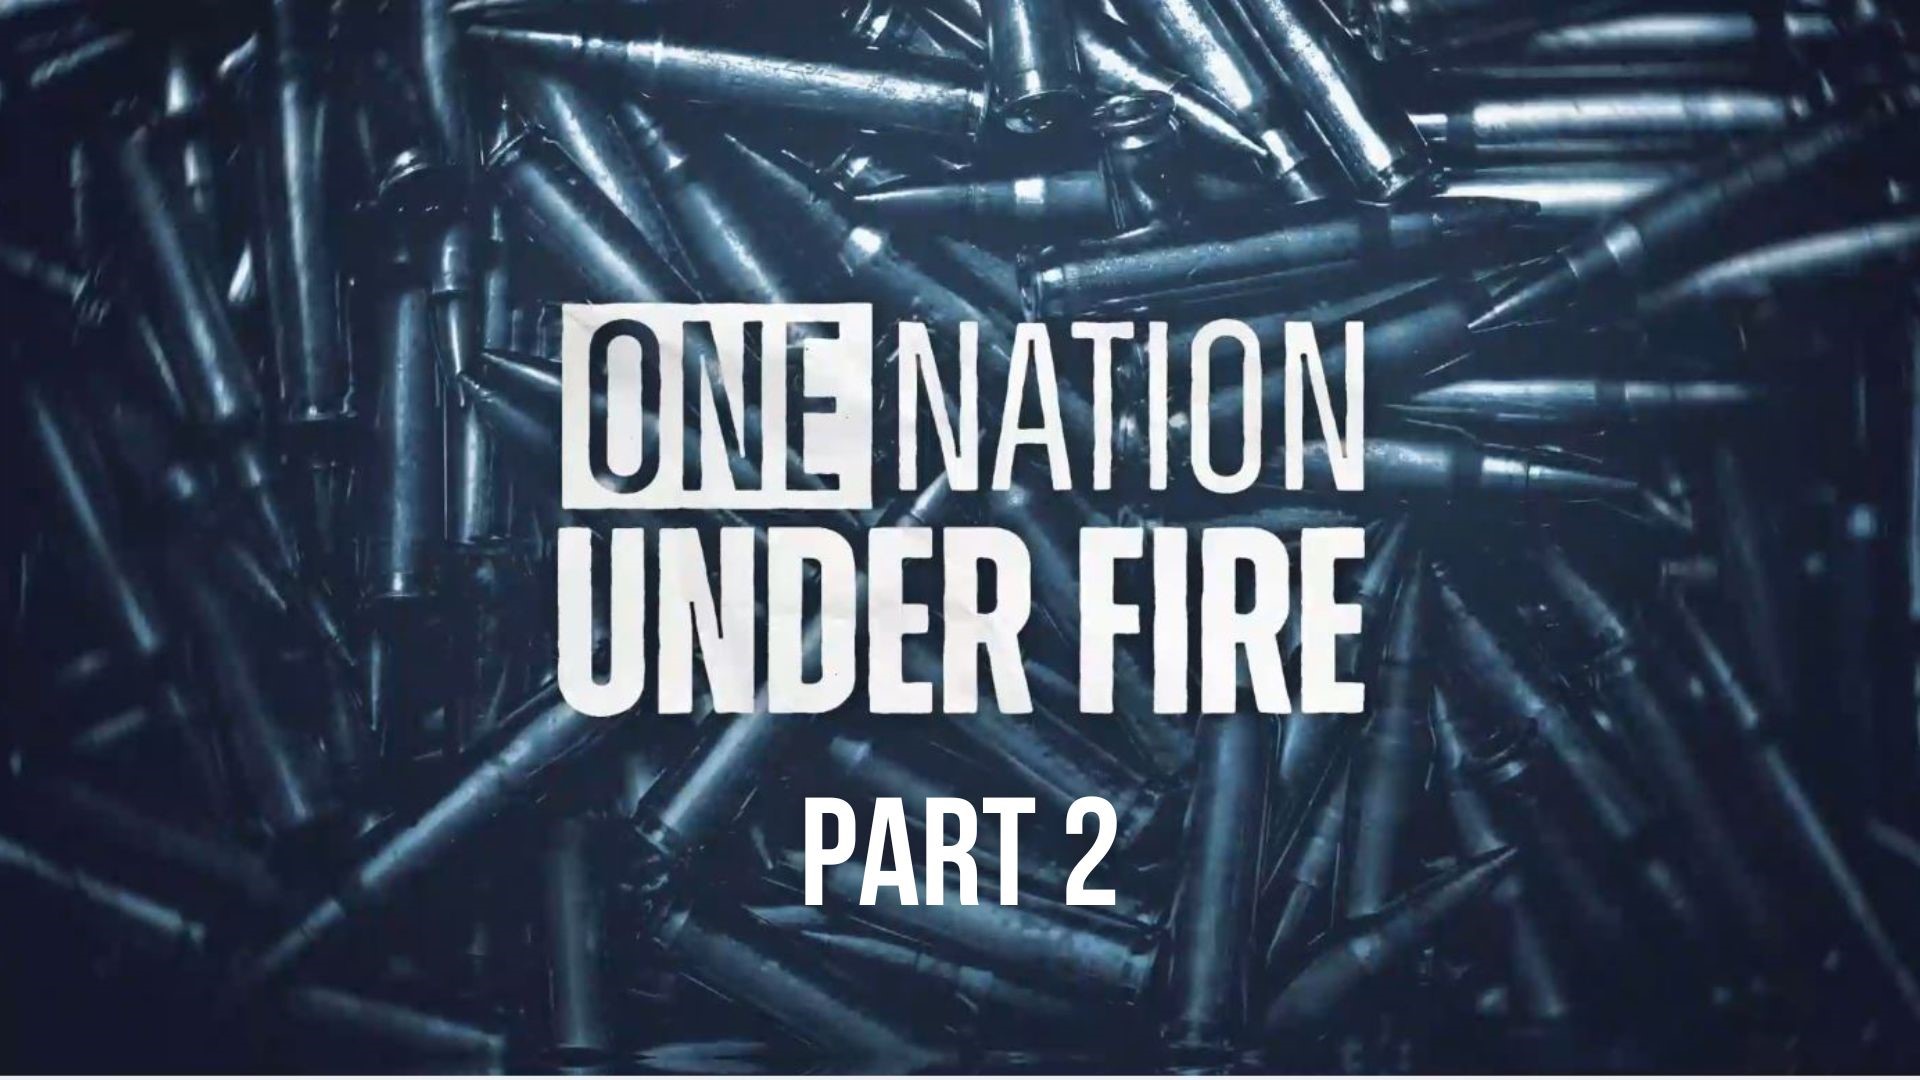 The second part of a TEGNA special looking into the state of gun violence in the U.S. From the increase in school and mass shootings to the fight for control.